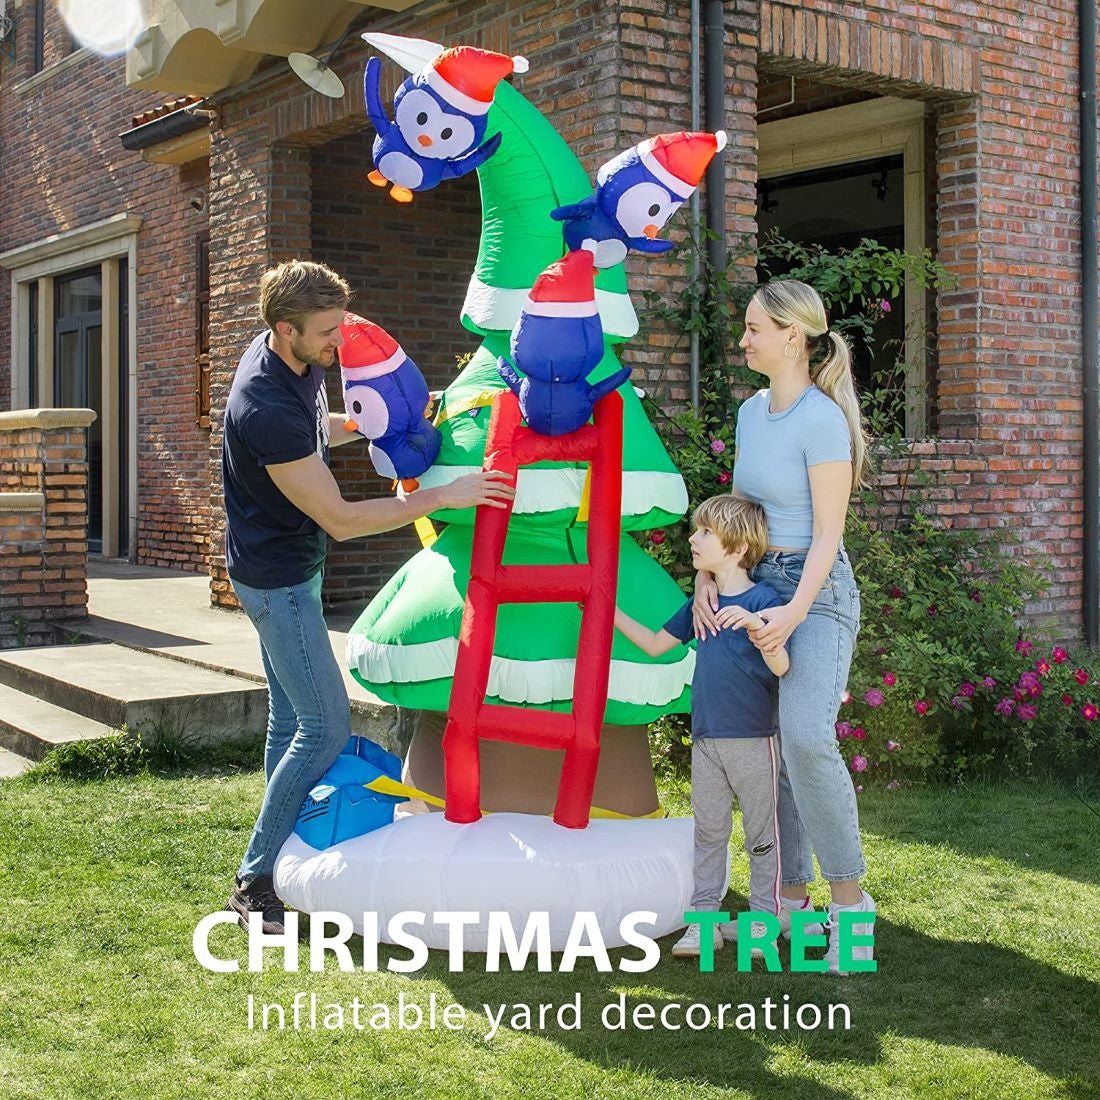 VIVOHOME 8ft Height Inflatable Christmas Tree with Penguins and Red Ladder Built-in LED Lights Blow up Outdoor Lawn Yard Decoration\